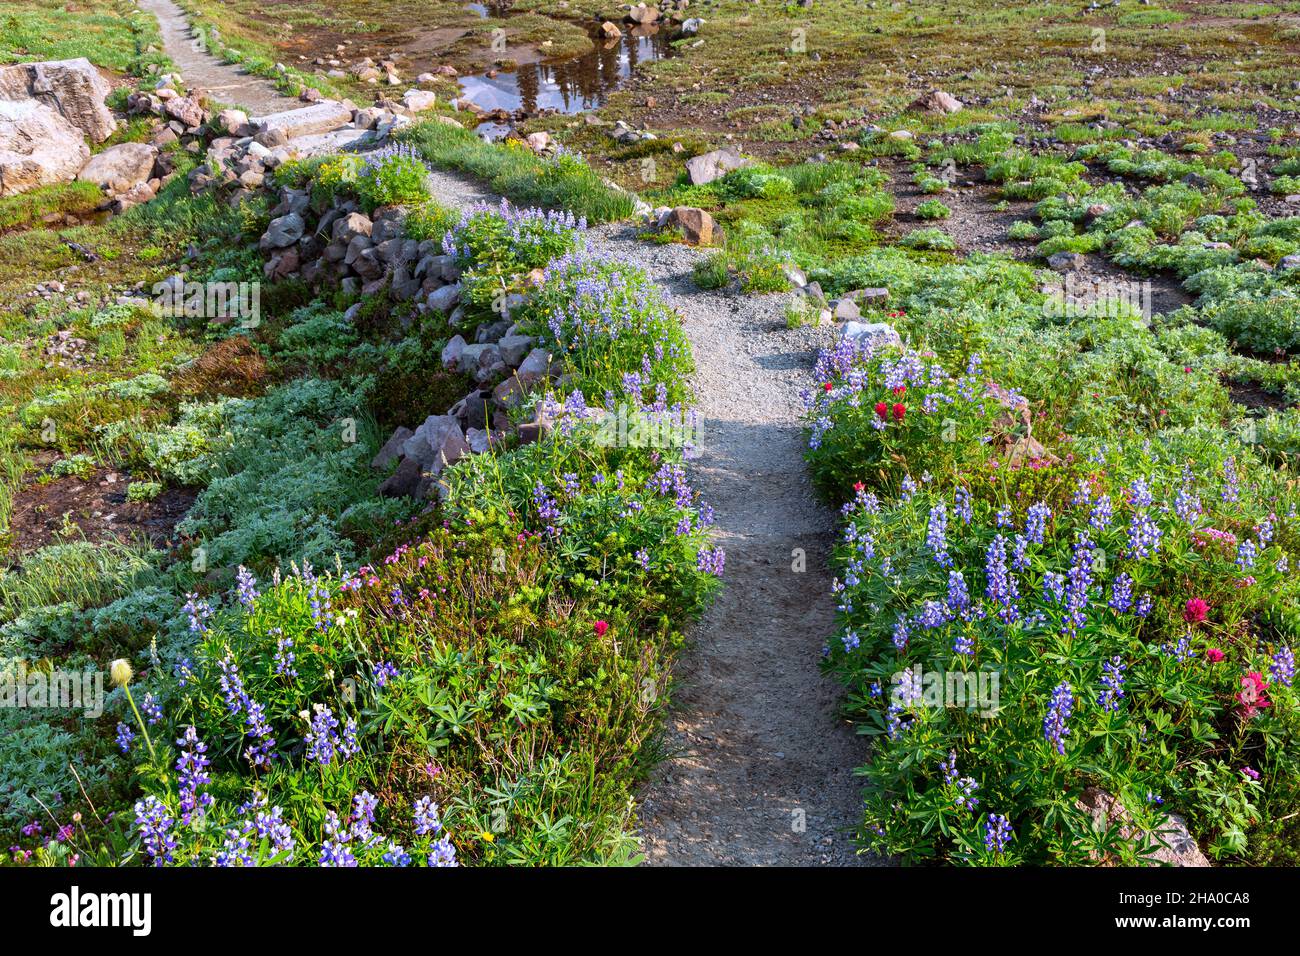 WA19876-00...WASHINGTON - Lupine, paintbrush and pink heather blooming in an open meadow near Paradise in Mount Rainier National Park. Stock Photo